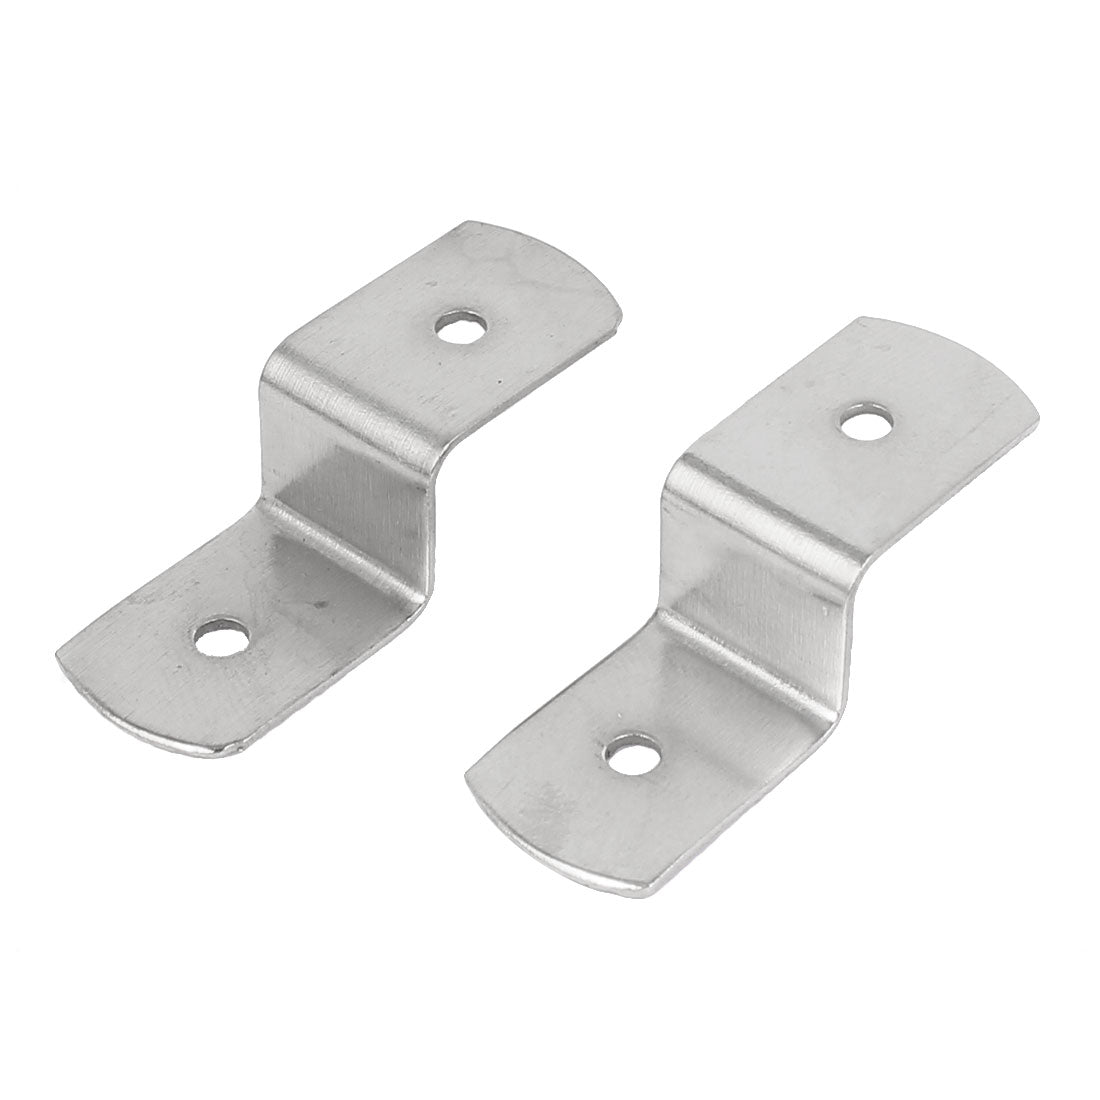 uxcell Uxcell 38mm x 13mm x 11mm Metal Z Shape Picture Frame Braces Brackets Silver Tone 10PCS